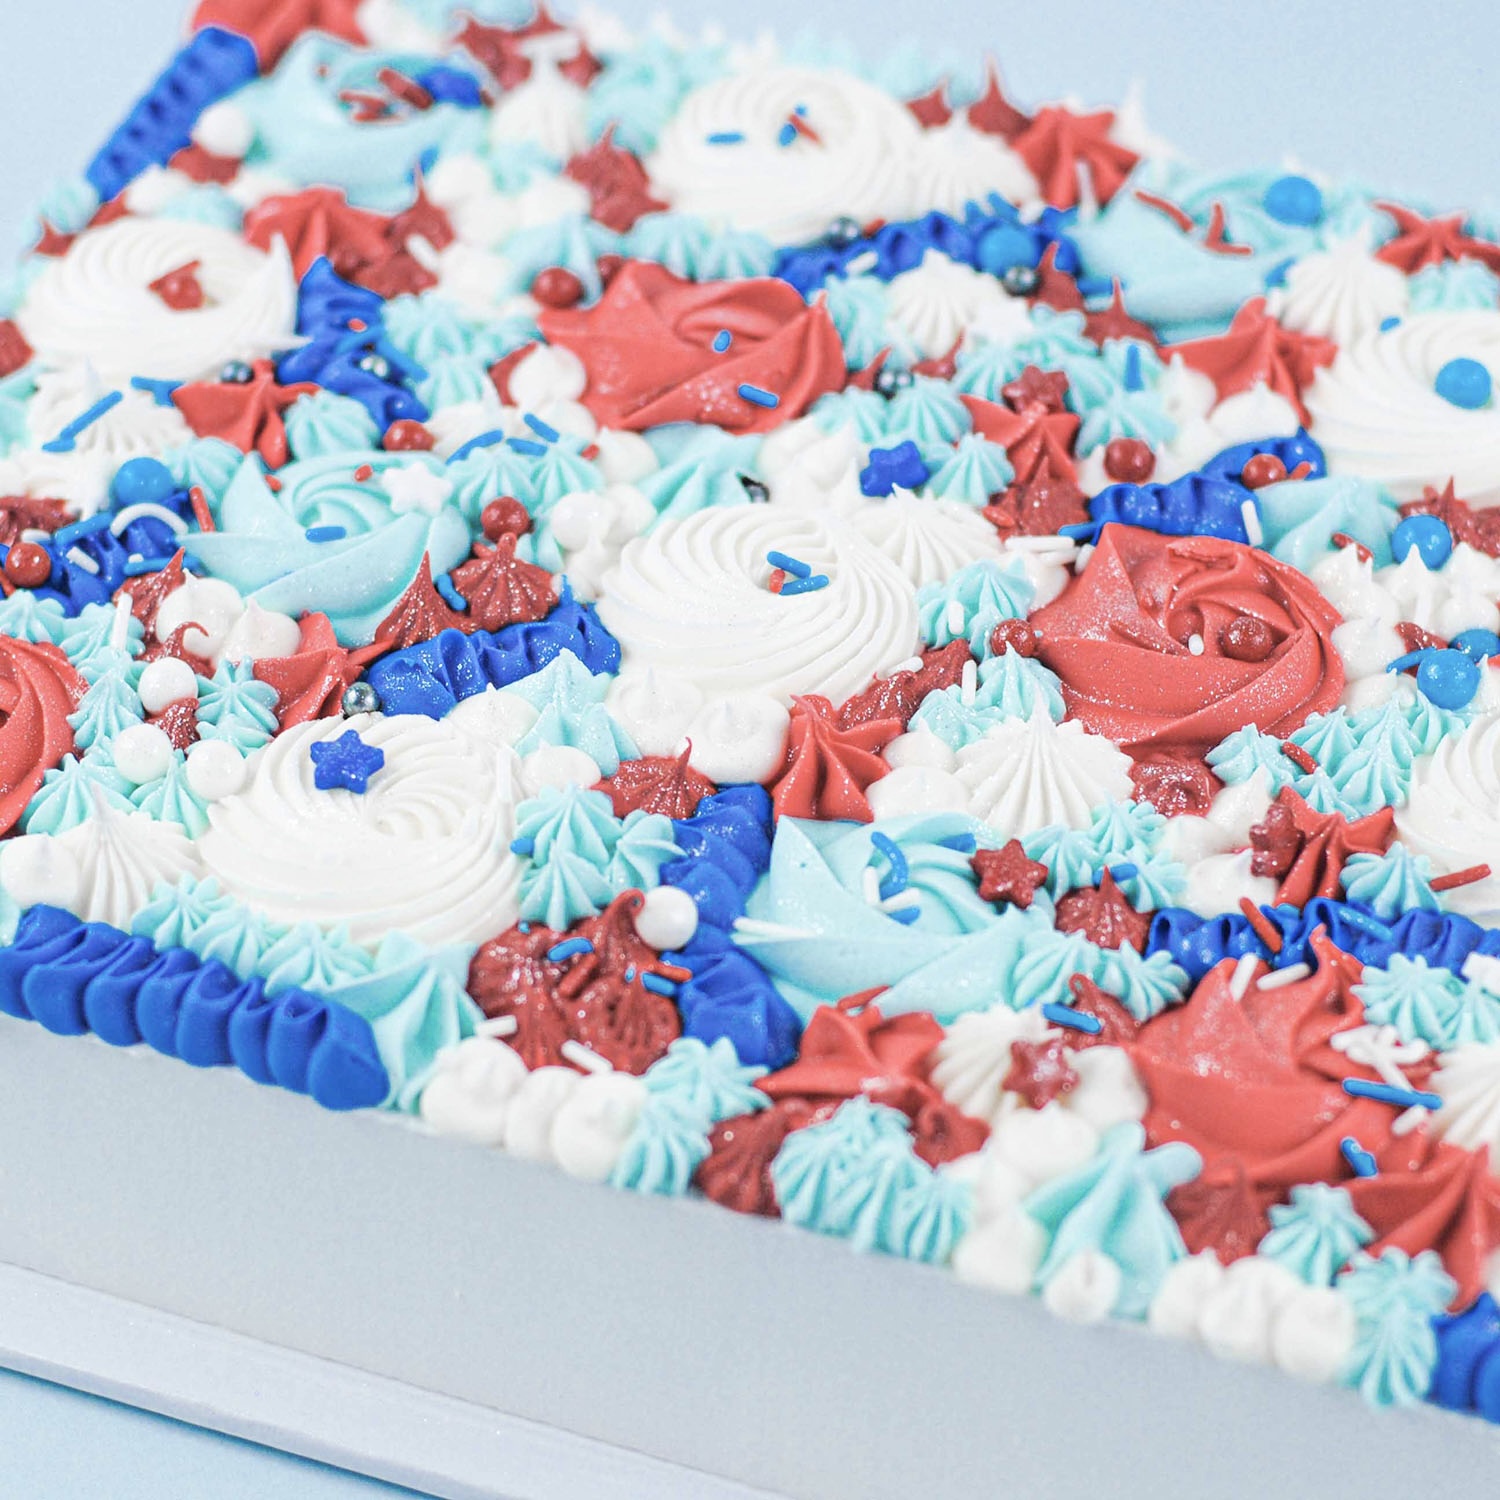 sheet cake decorated in red, white and blue buttercream rosettes, dollops and ribbons and finished with candy pearls, stars and jimmes with a spray of jewel dust.